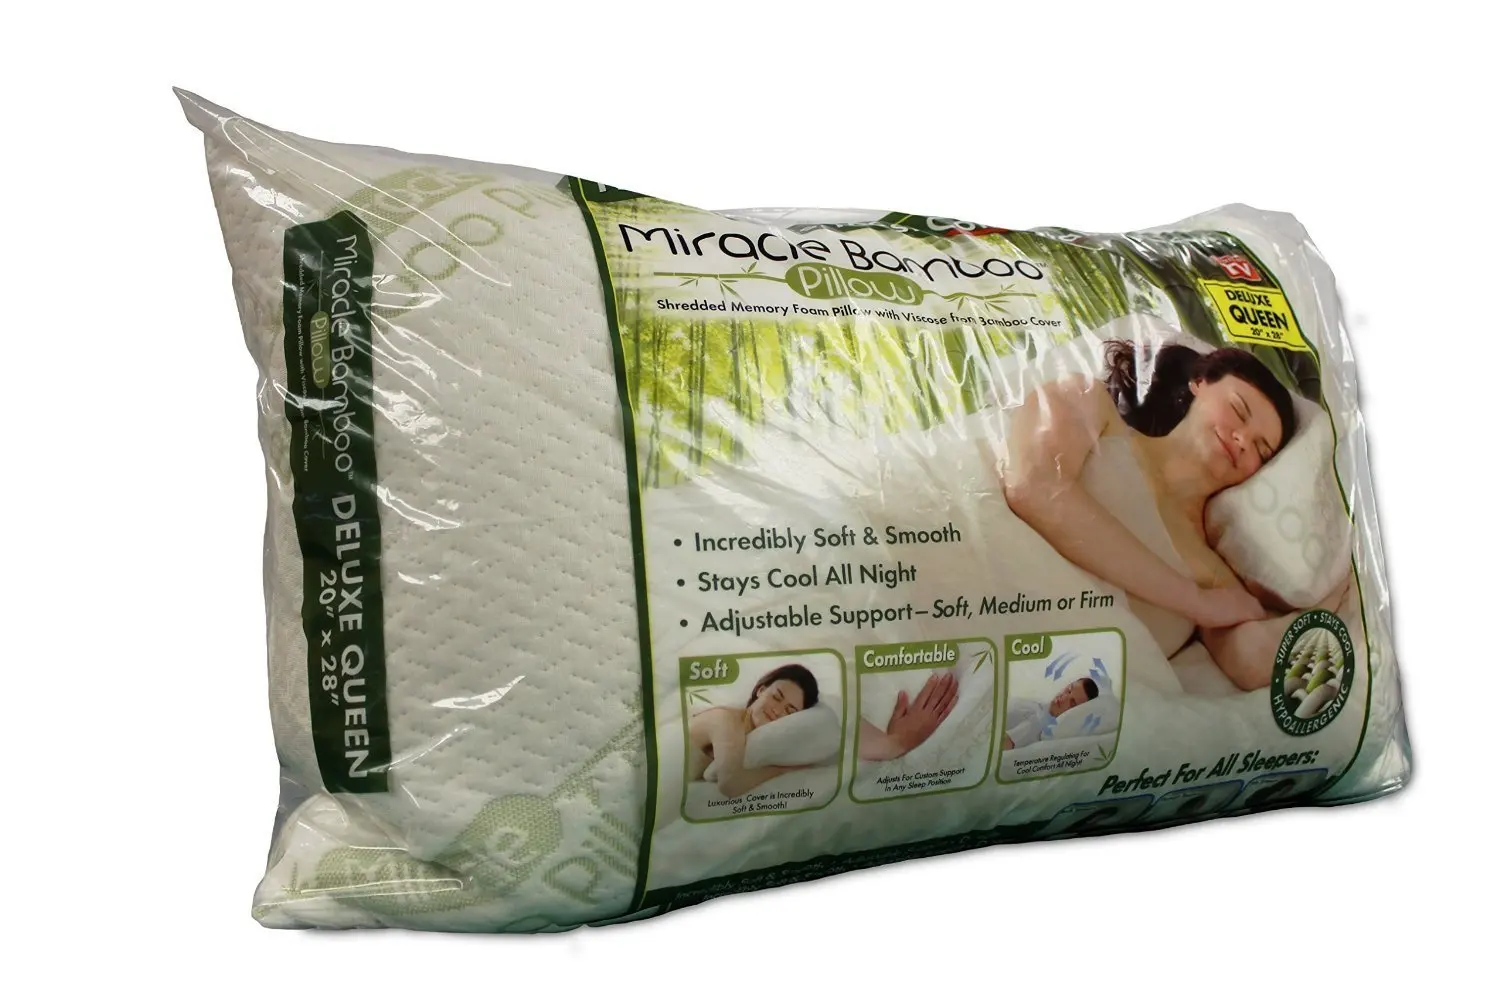 The Original Miracle Bamboo Shredded Memory Foam Pillow - Queen. 